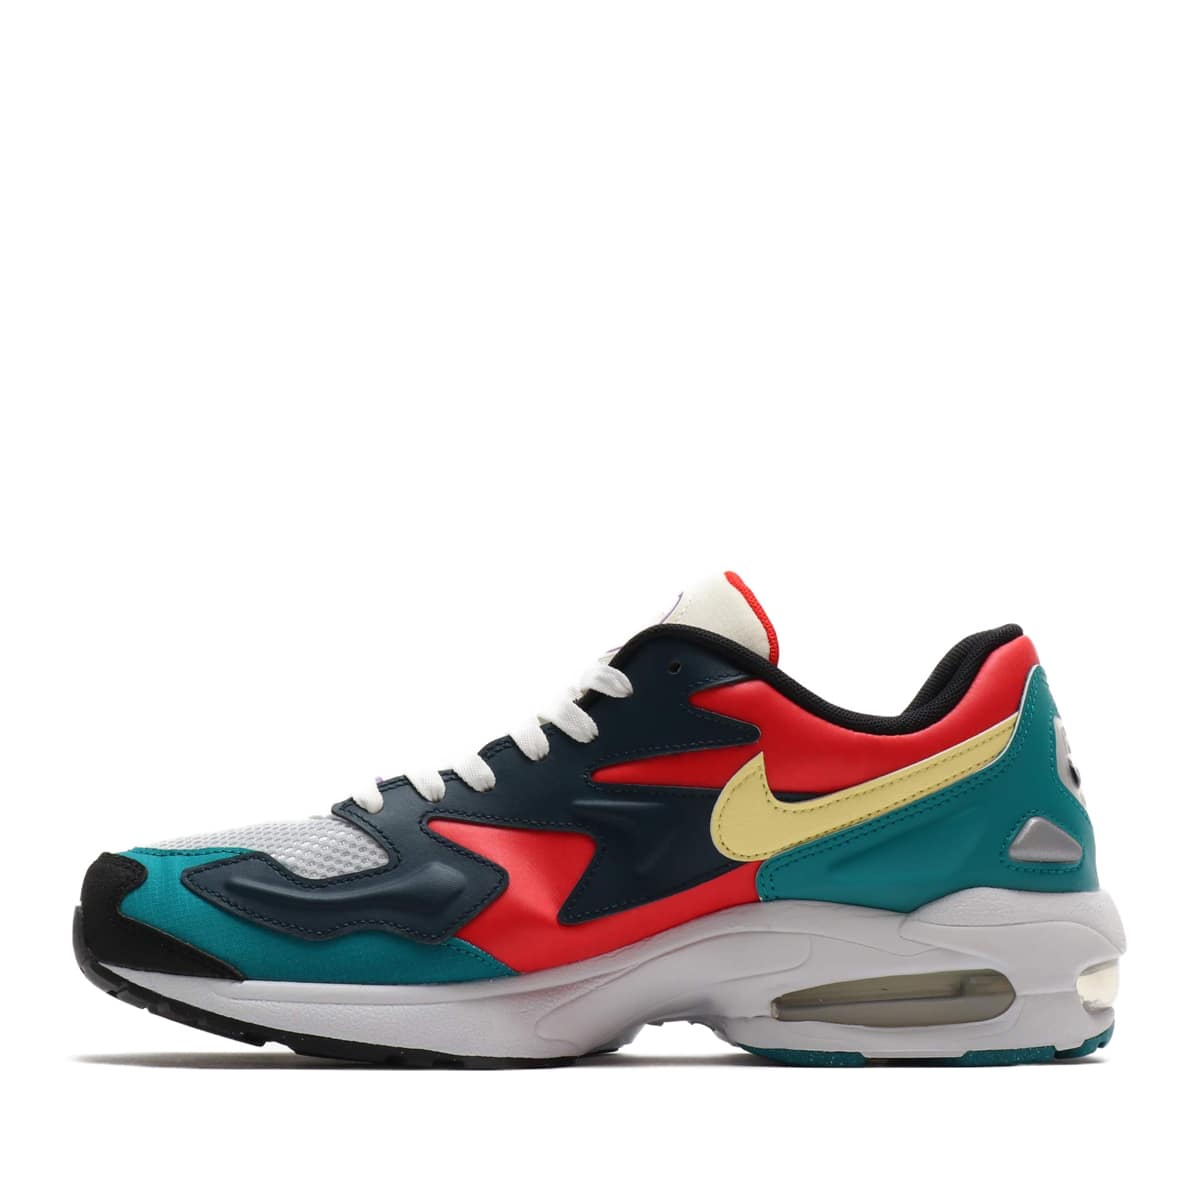 NIKE AIR MAX2 LIGHT SP HABANERO RED/ARMORY NAVY RADIANT EMERALD SU S